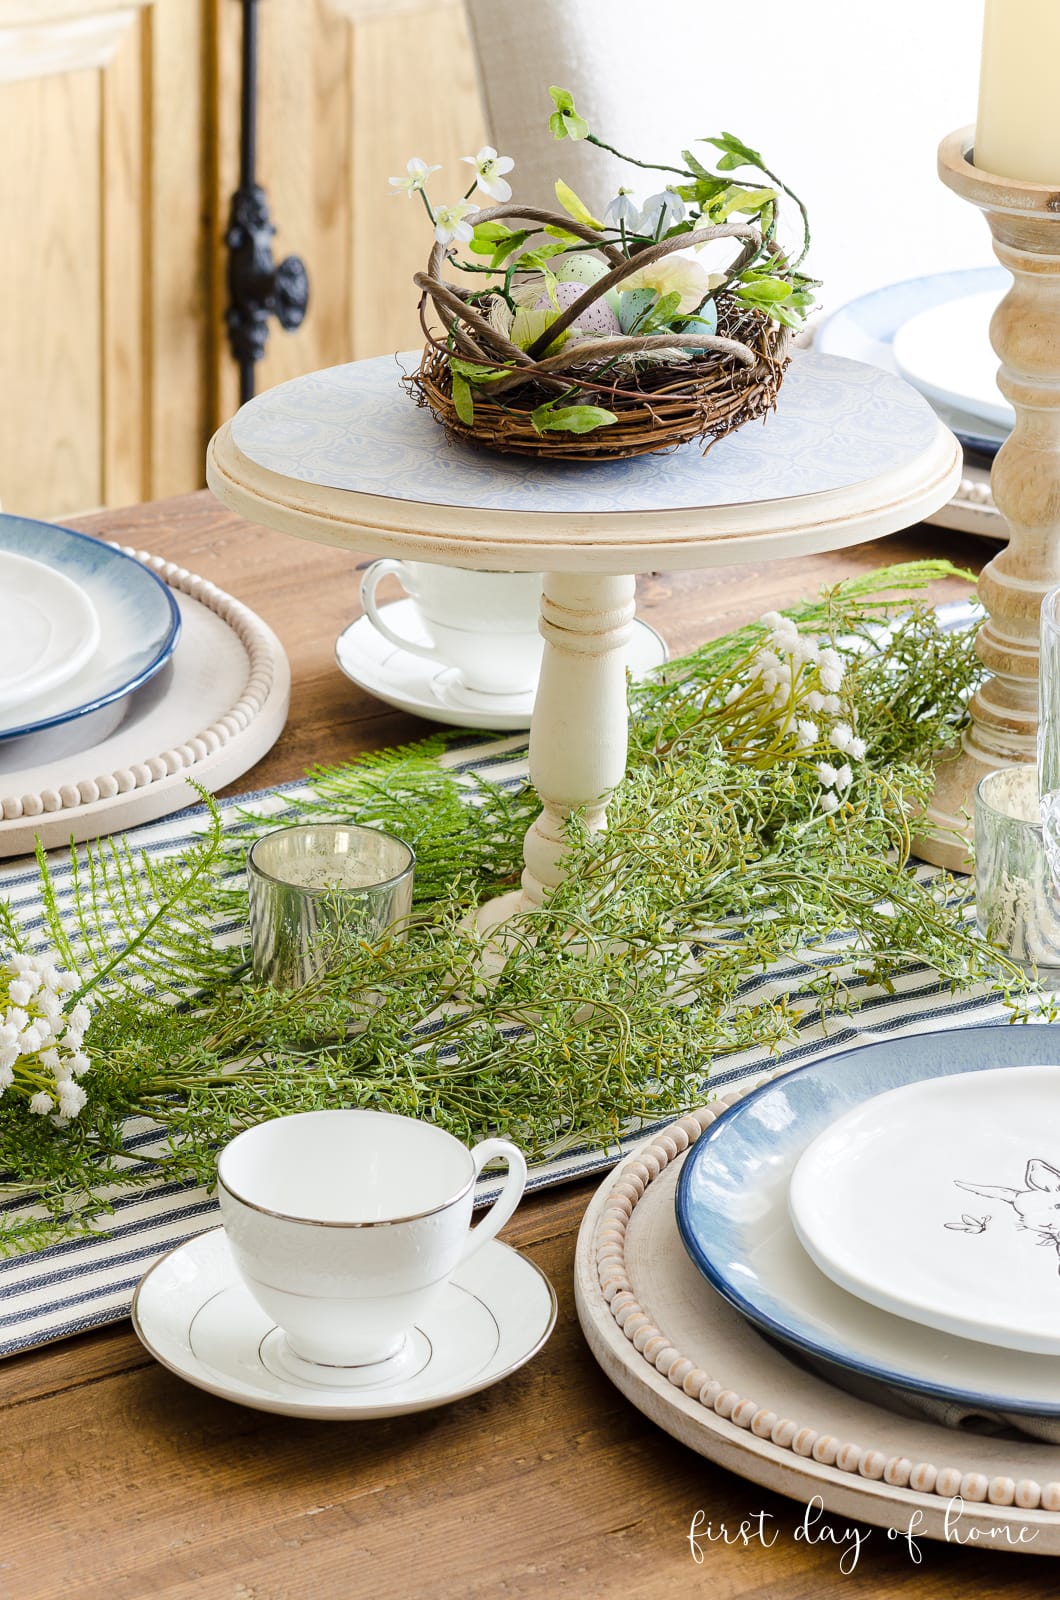 DIY cake stand with bird's nest on spring table